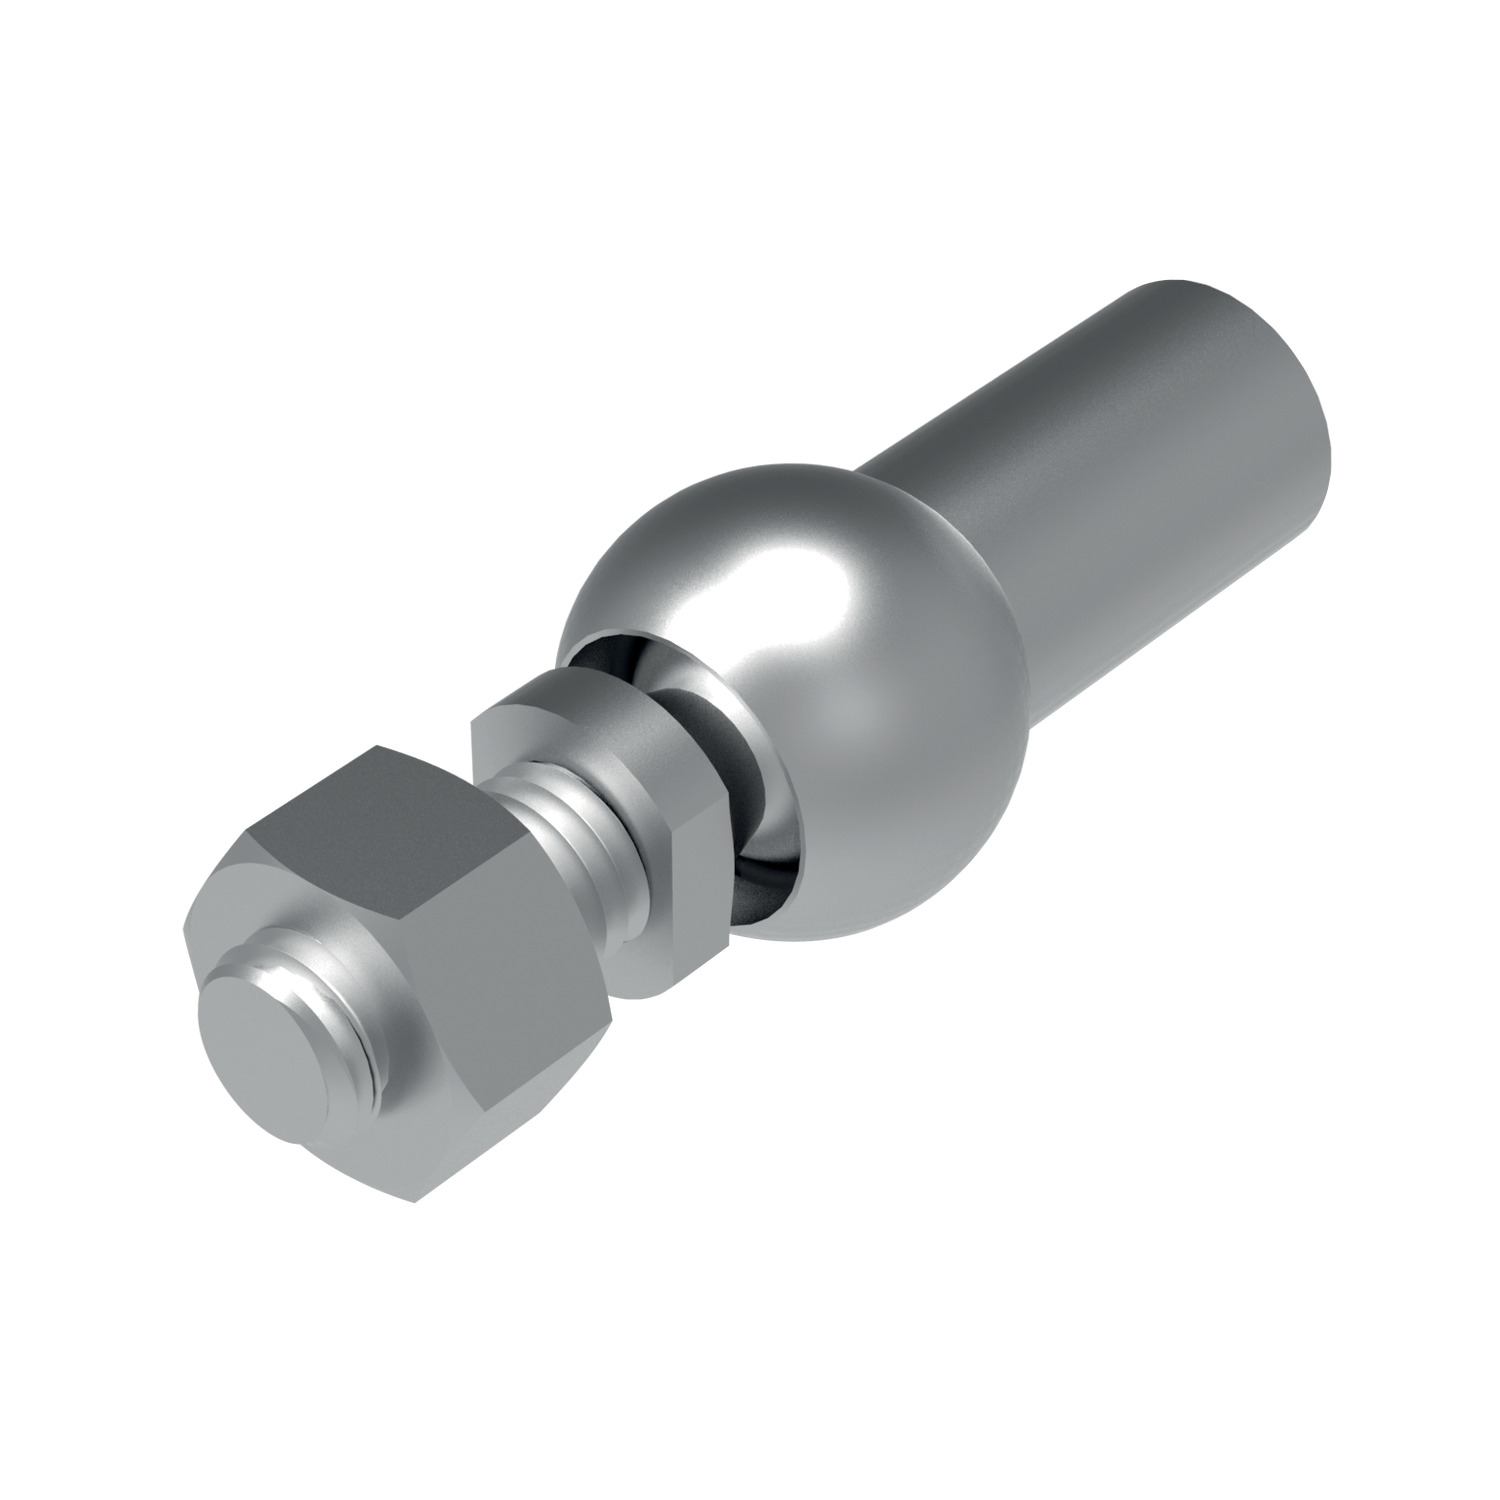 R3500 - Axial Ball and Socket Joints